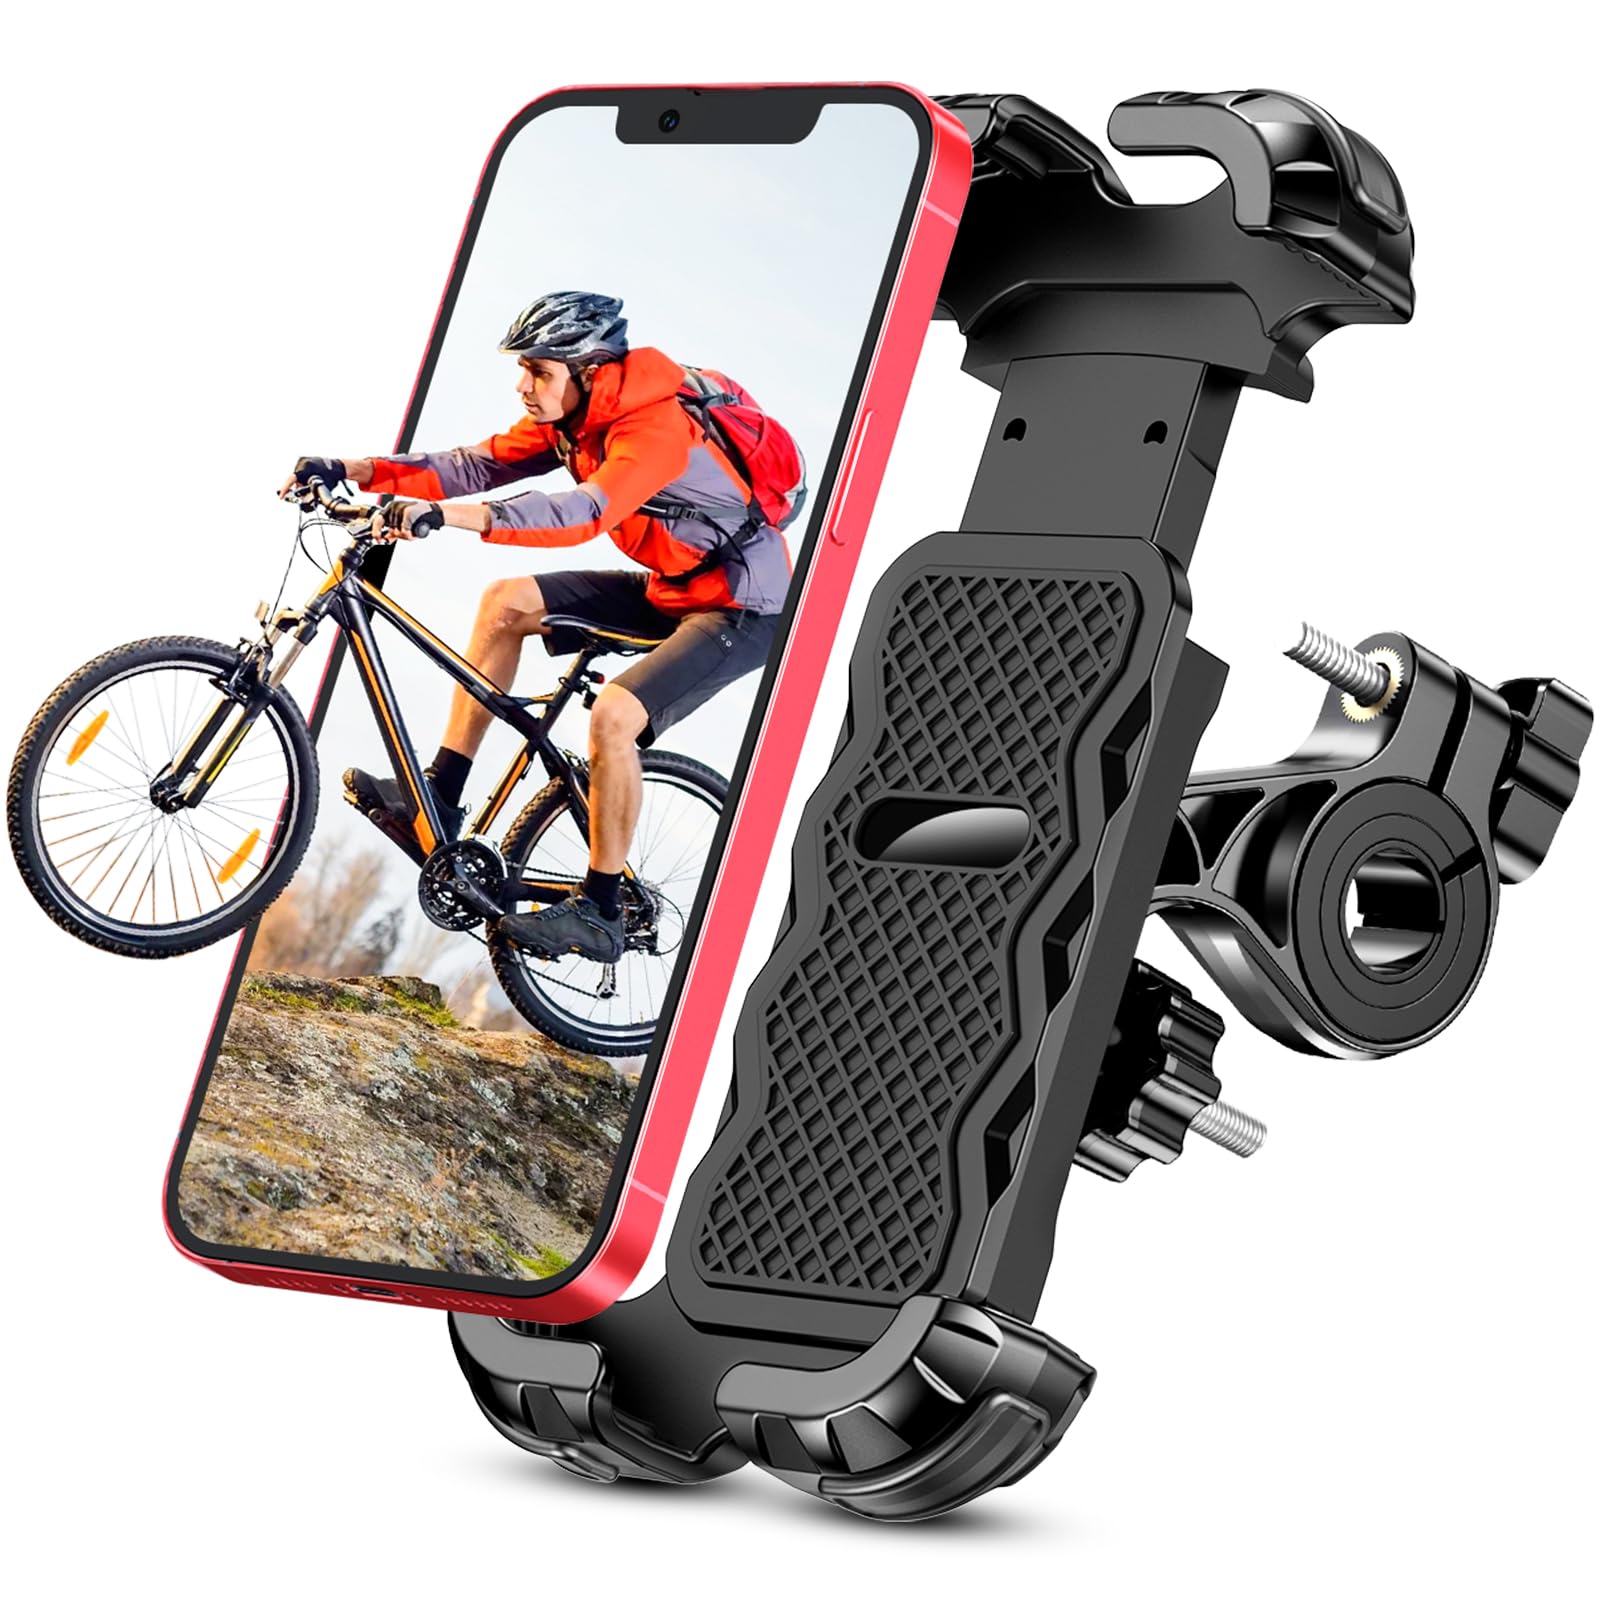 iBytoc Motorcycle Phone Mount, Upgrade [Full Protection] [Security Lock] Bike Phone Mount 360° Rotatable, Phone Holder for Bicycle, Scooter, Handlebar, Widely Compatible with Cellphones (4.7-6.8”)